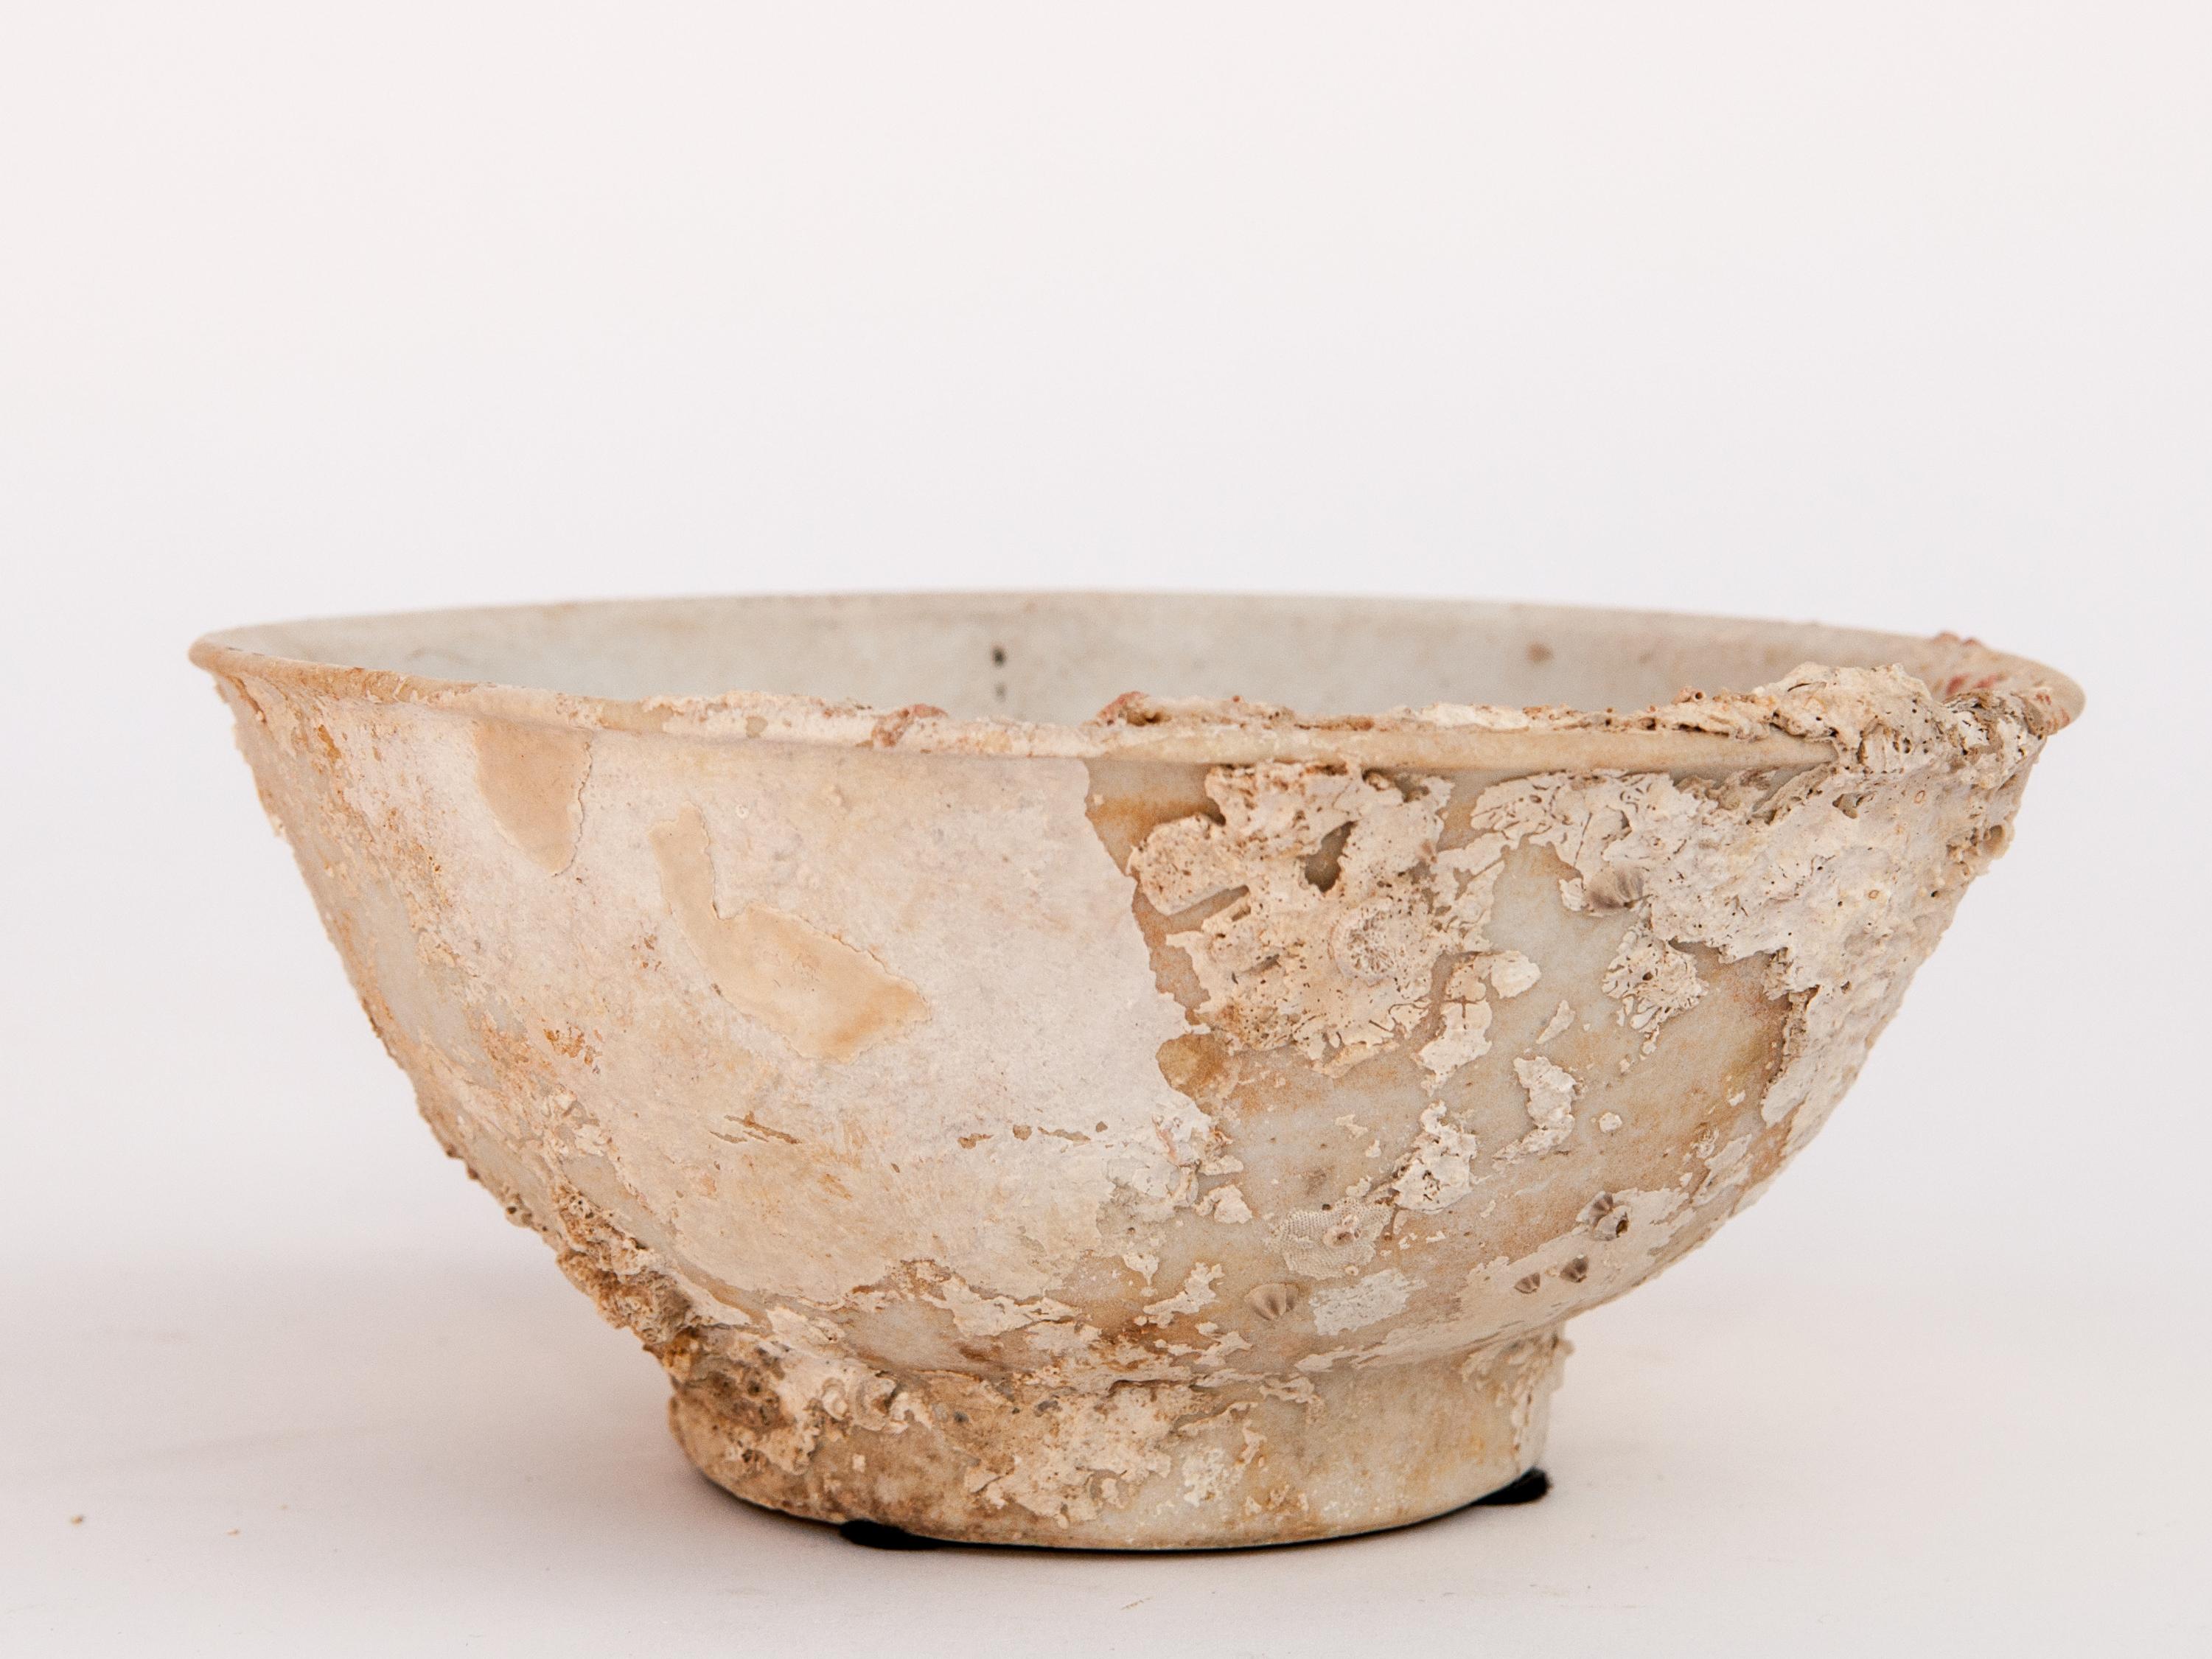 Chinese Small Song Dynasty Celadon Bowl with Encrustations, 12th Century